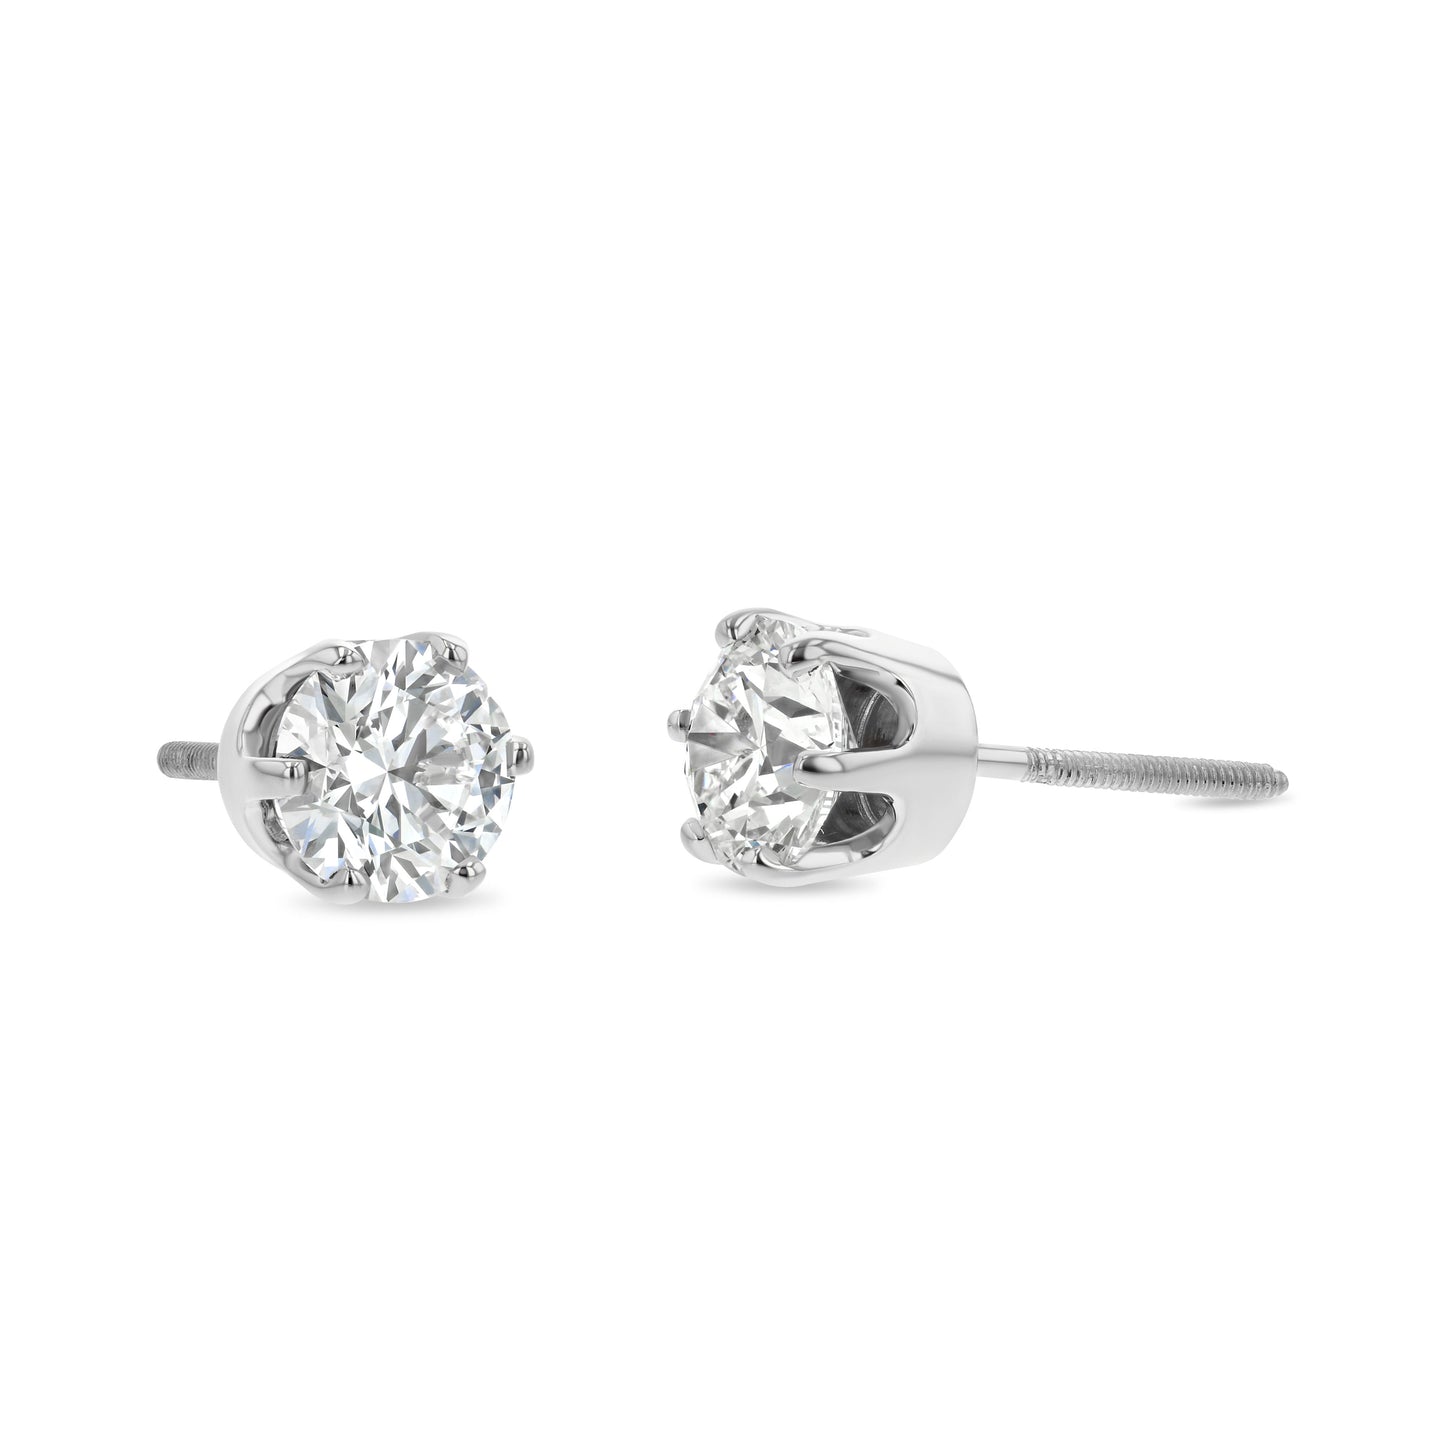 14k White Gold 6-prong Round Brilliant Diamond Stud Earrings (0.32 Ct. T.w., Si1-si2 Clarity, J-k Color)